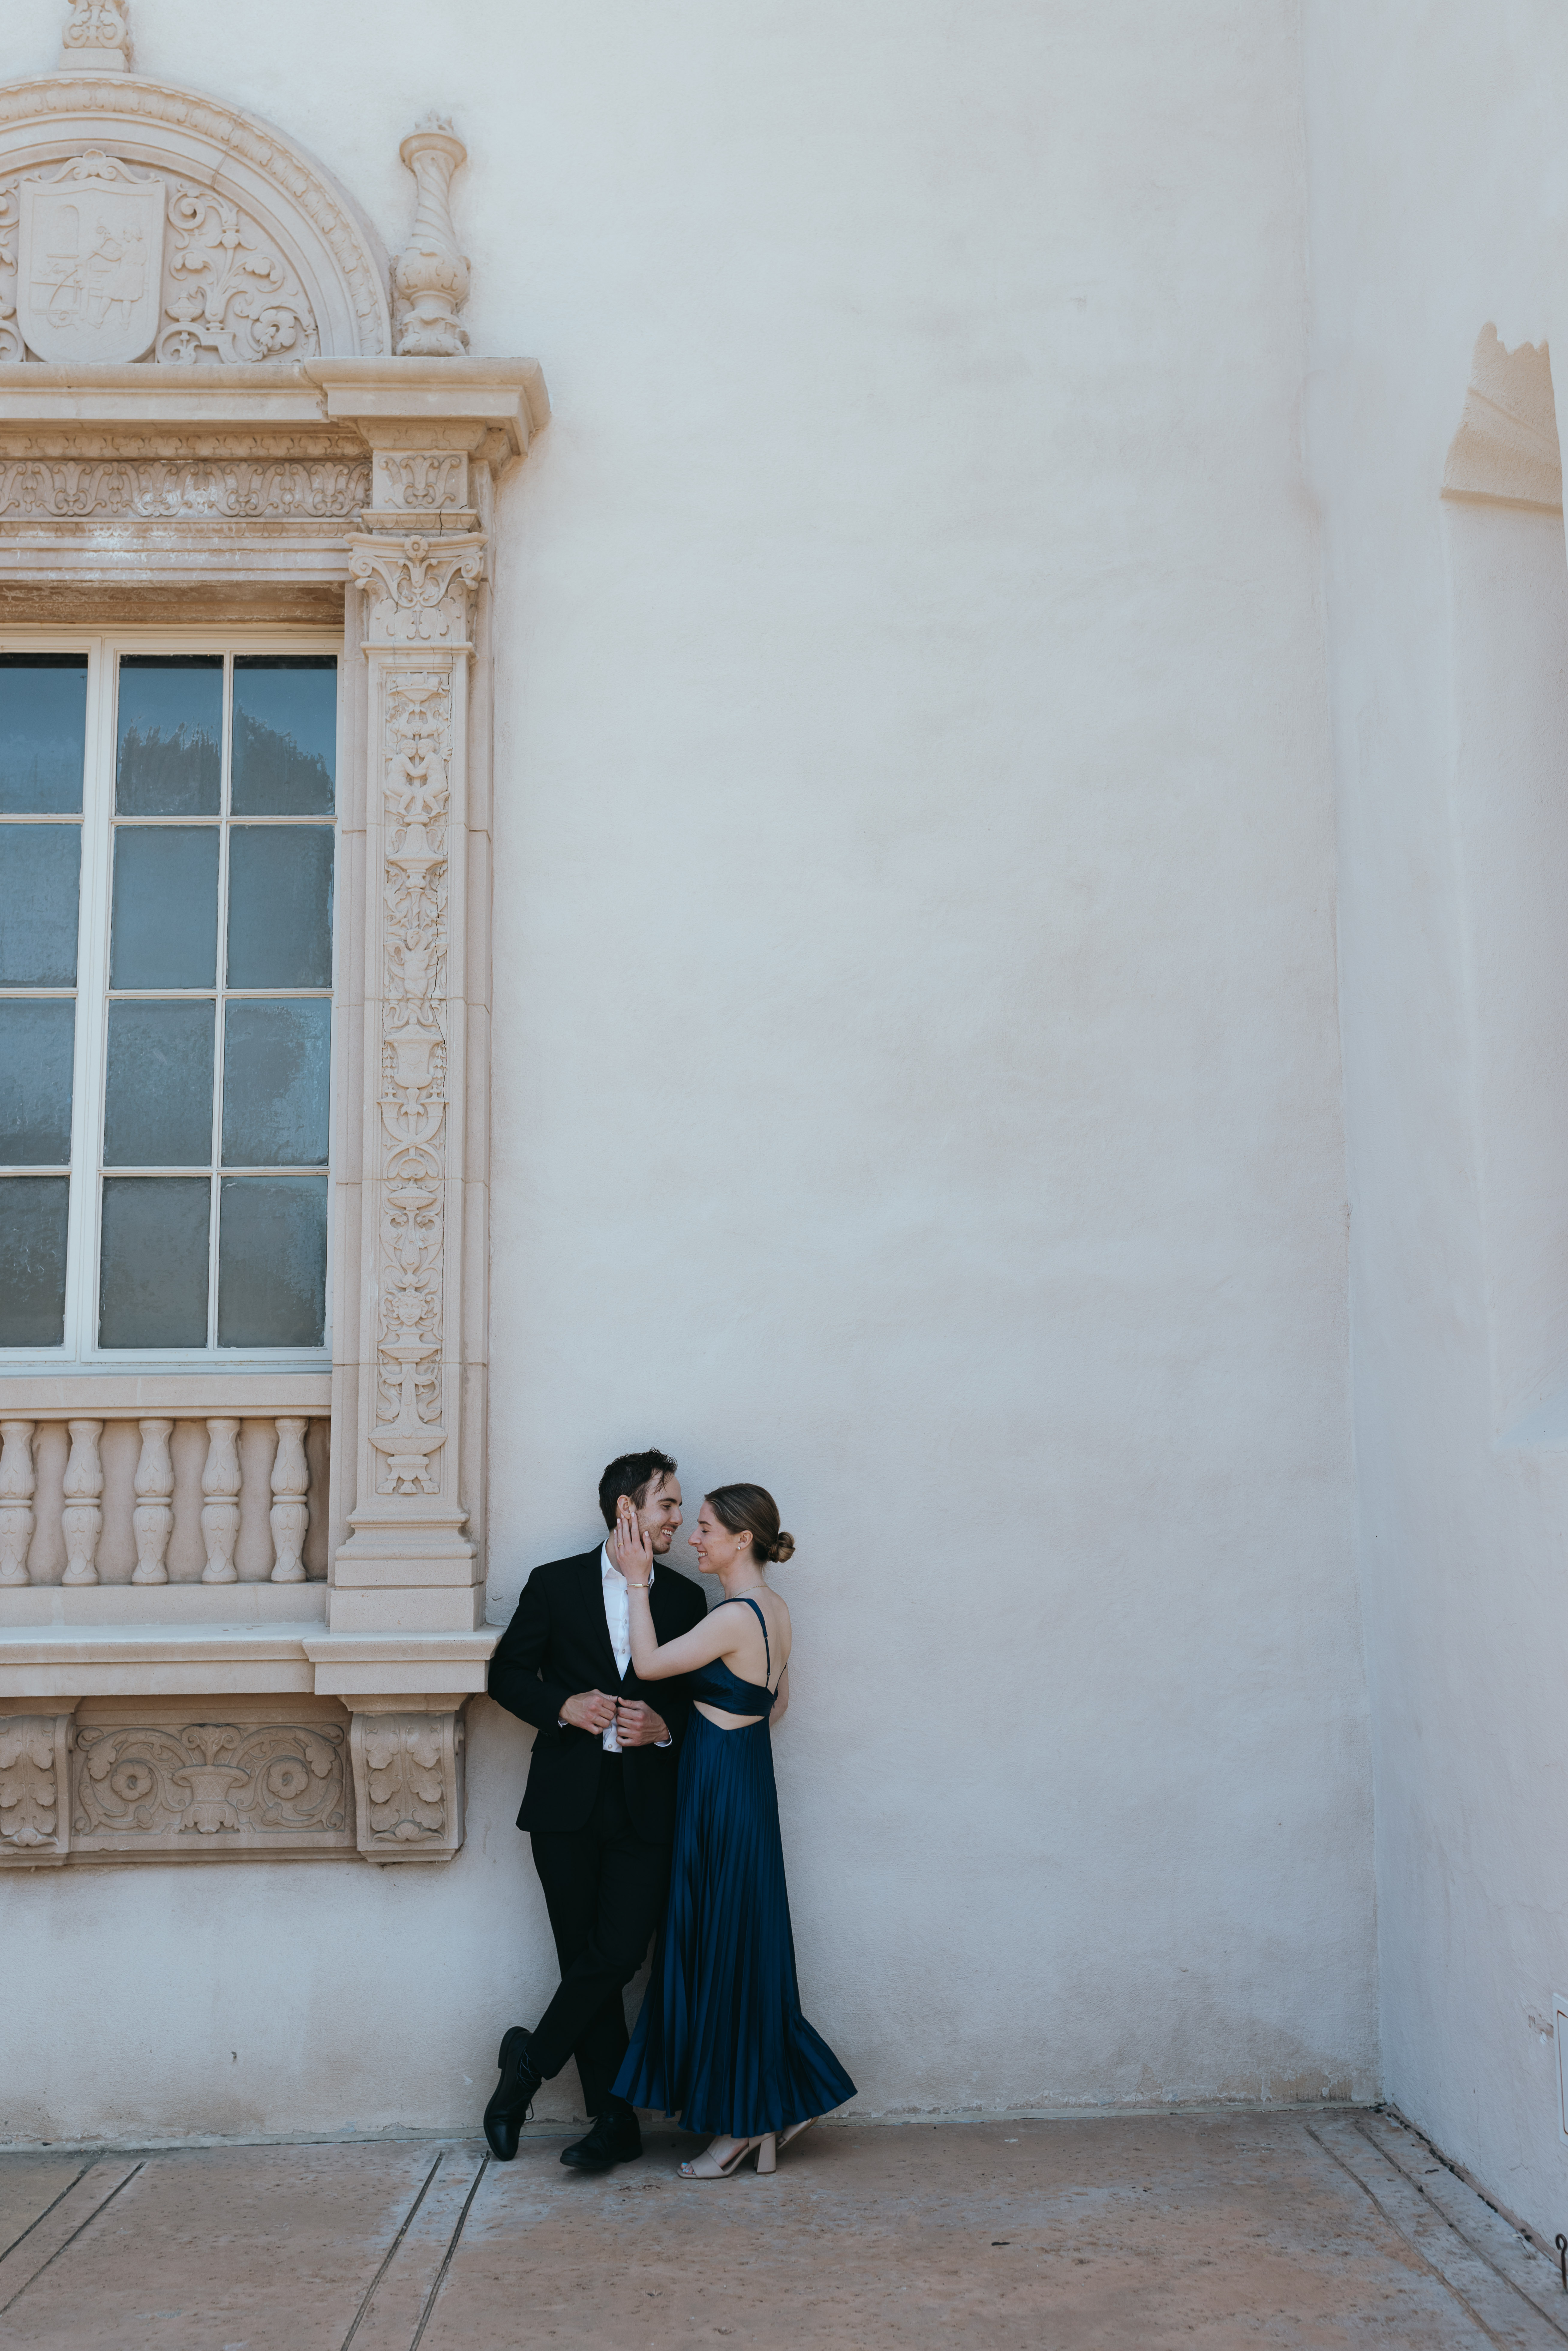 Adding "Something Blue" Details to An Engagement Session at Balboa Park by Kayla Shenk Photo